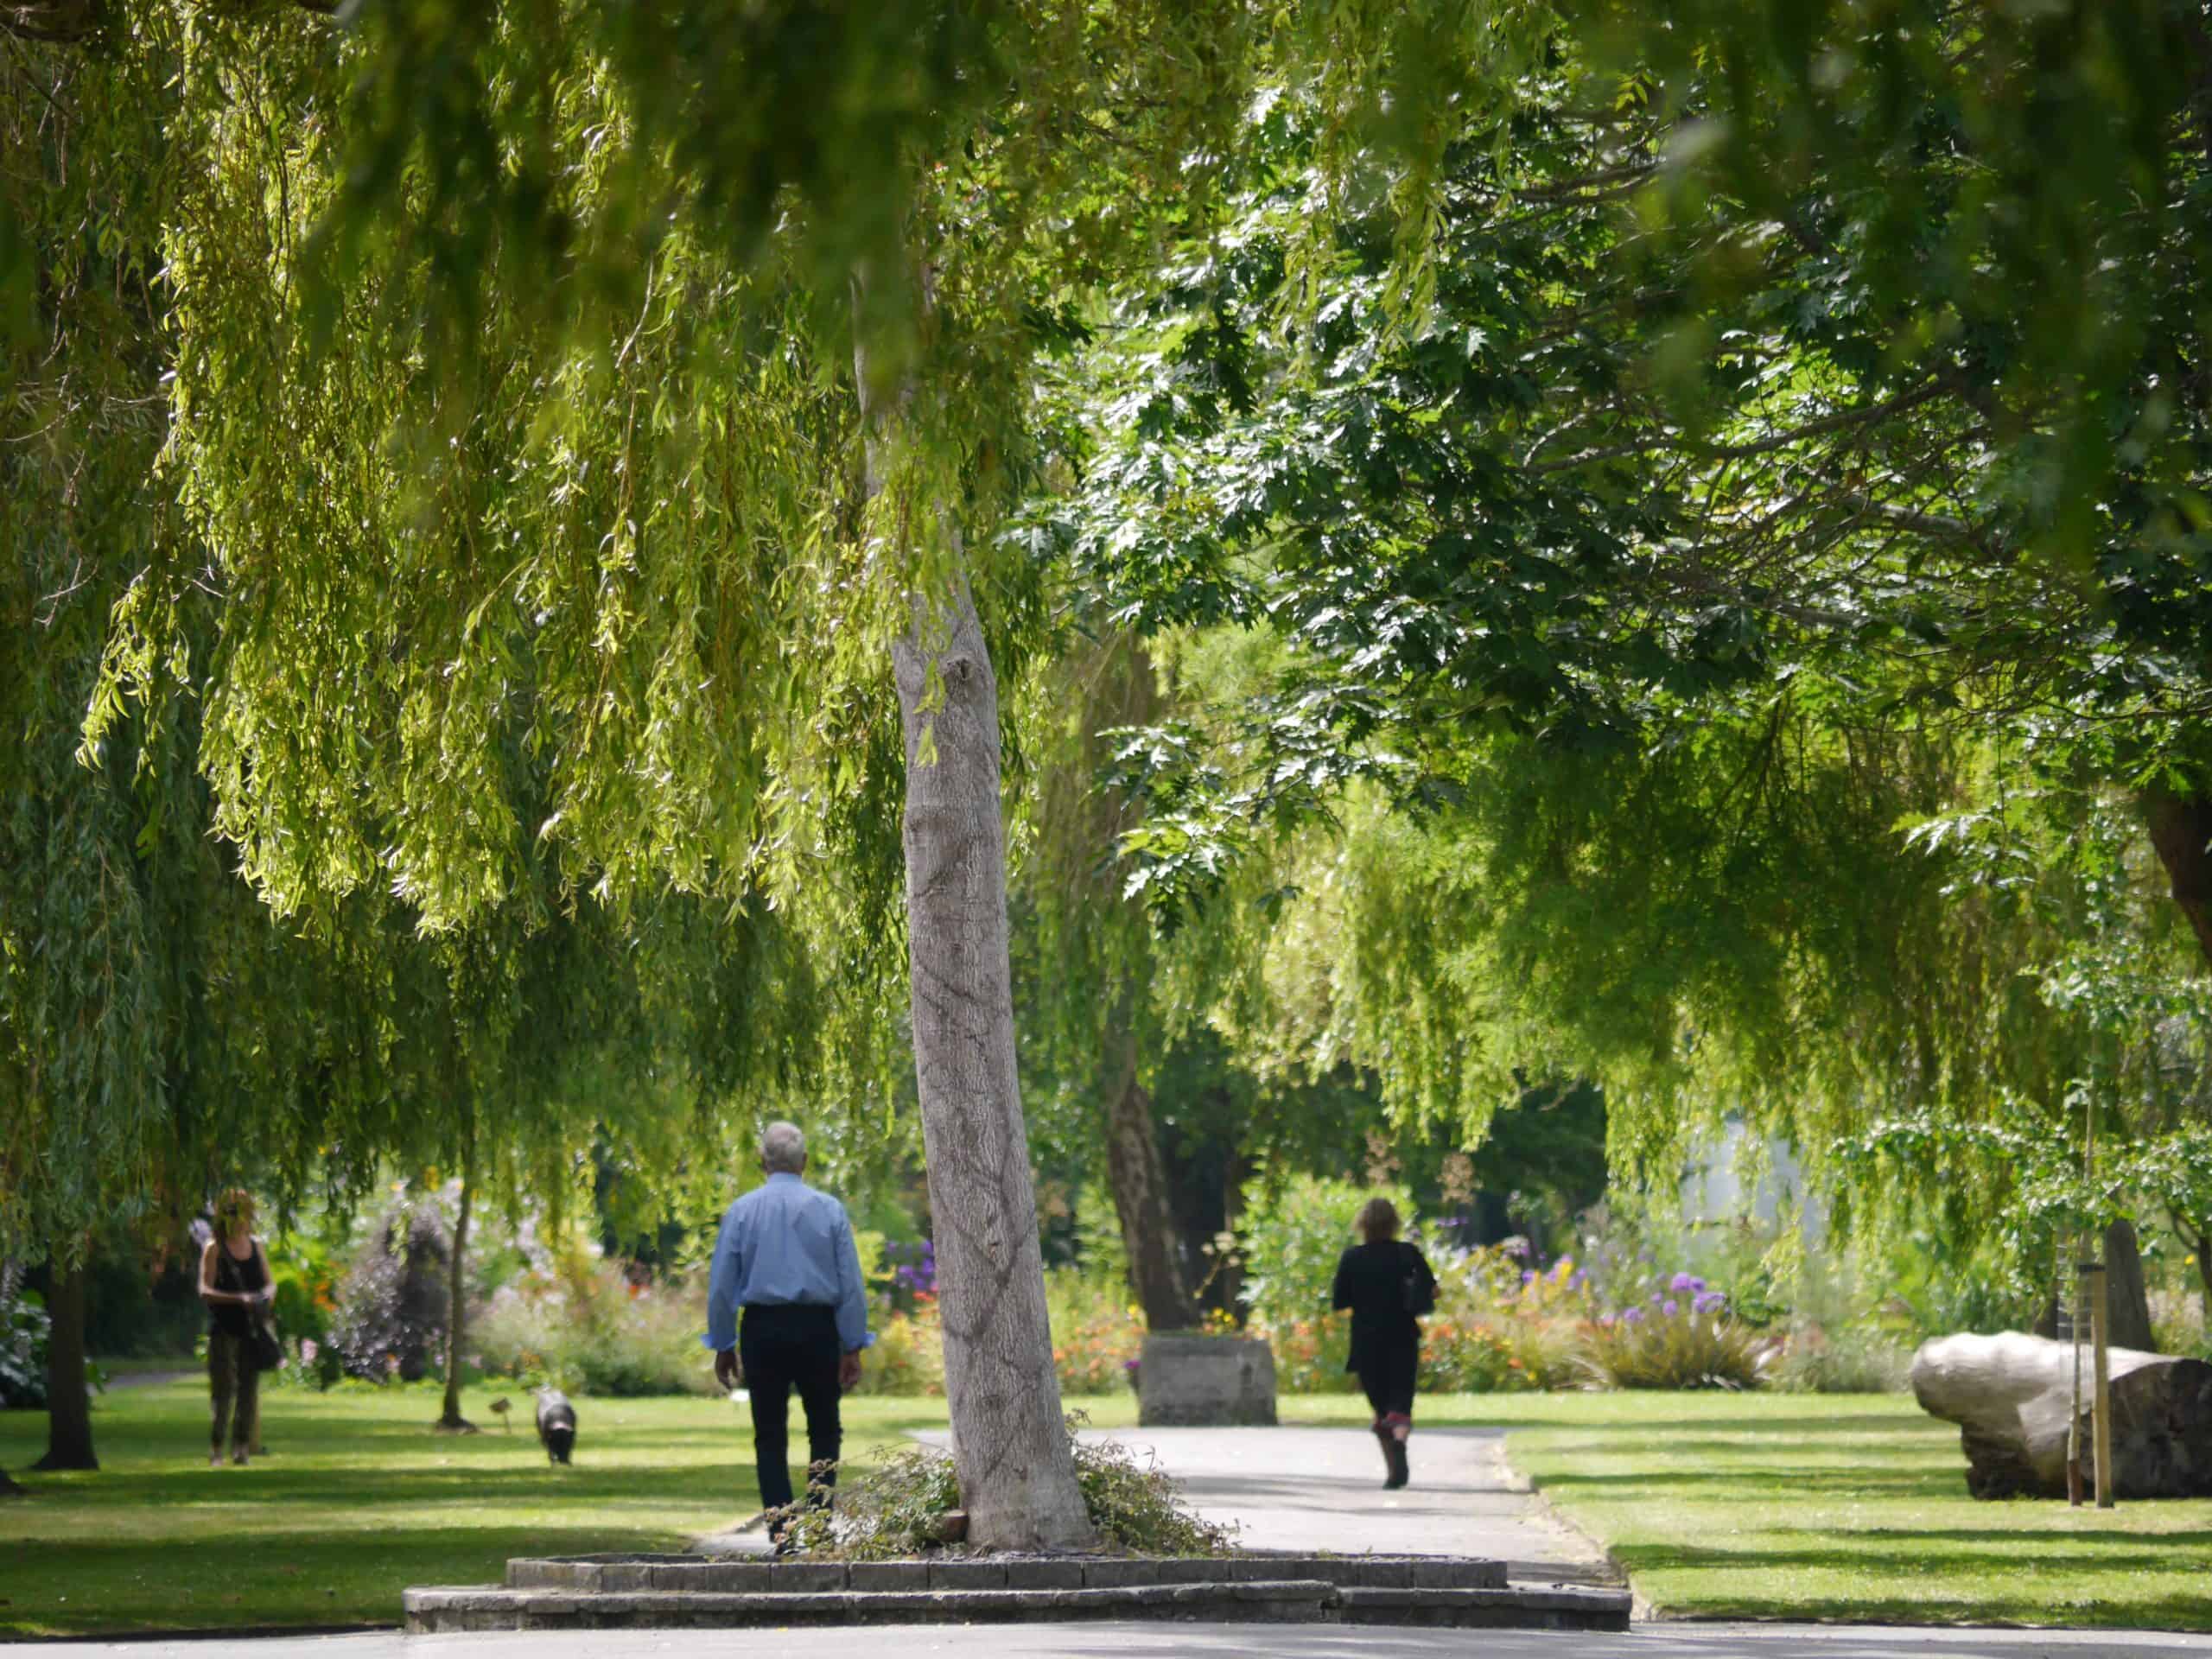 A peaceful park scene with people walking along a path, surrounded by lush green trees and a prominently textured tree trunk in the foreground, capturing the essence of "Summer is Here!